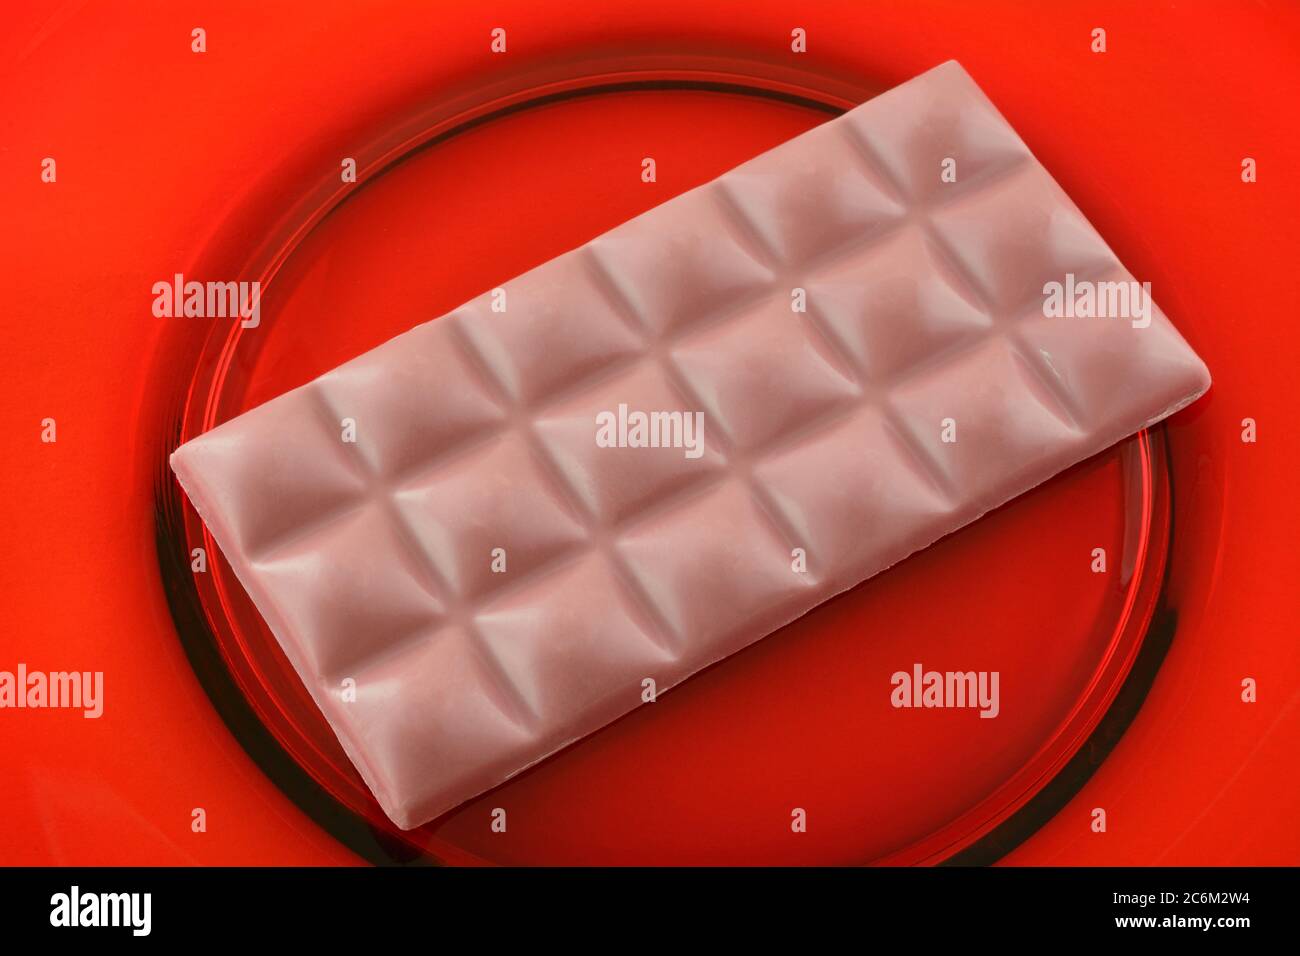 Closeup of ruby chocolate cacao snack bar on red glass plate Stock Photo